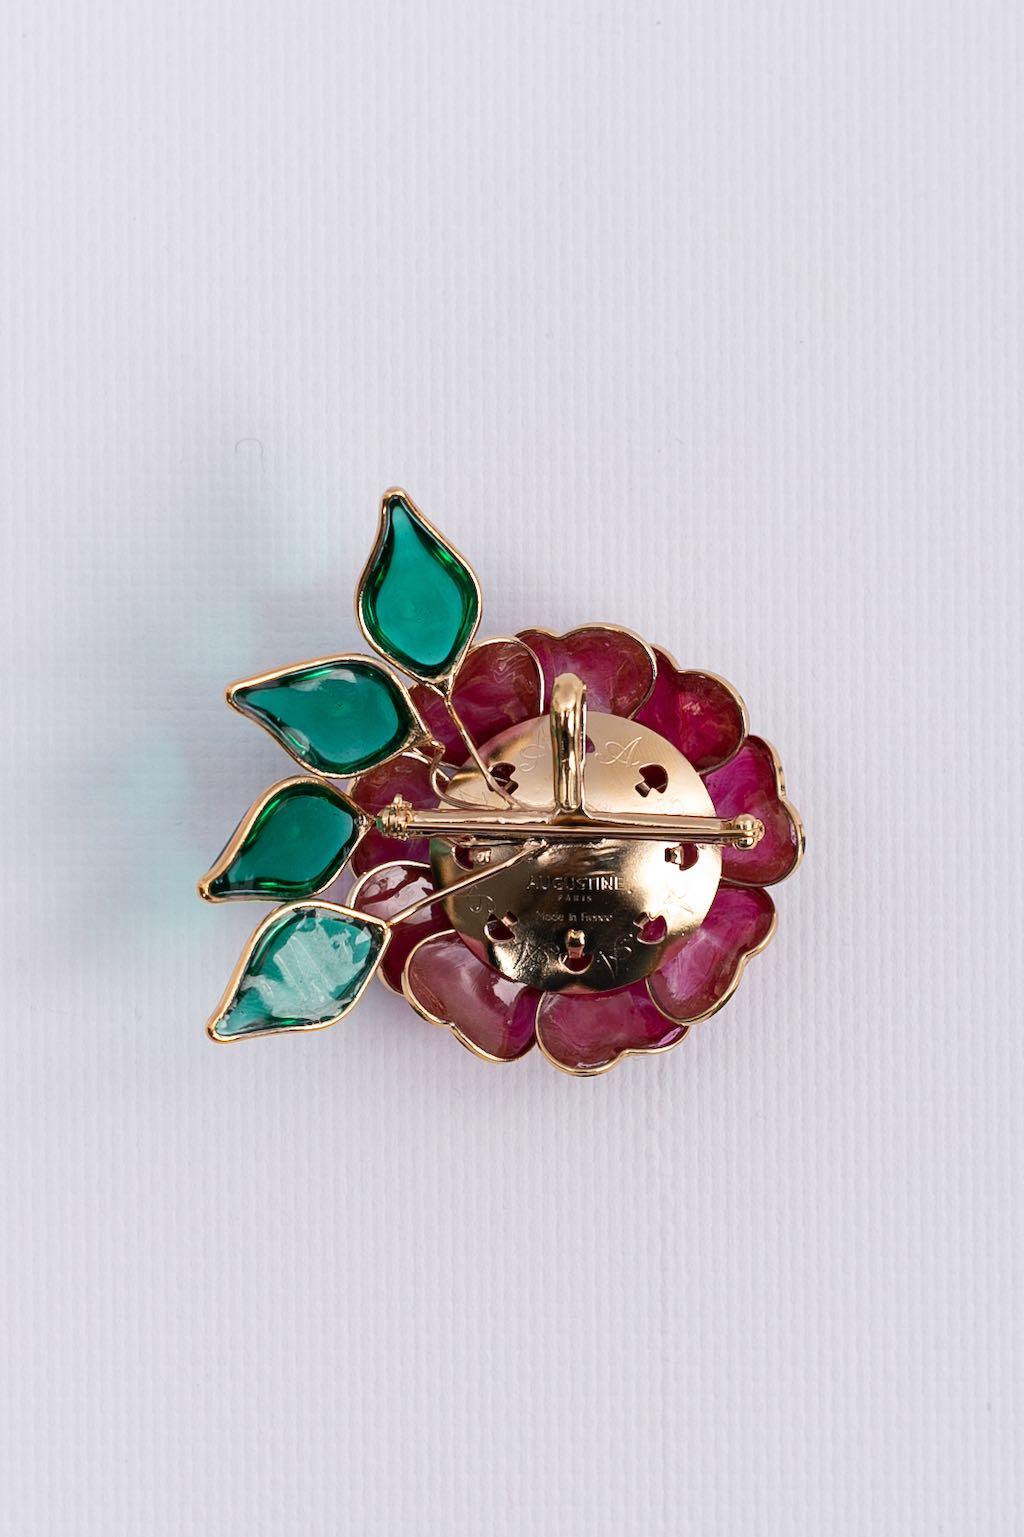 Augustine (Made in France) Gilded metal and glass paste brooch representing a flower. It can be worn as a pendant thanks to its hook.

Additional information:
Dimensions: 7 cm x 6 cm (2.76